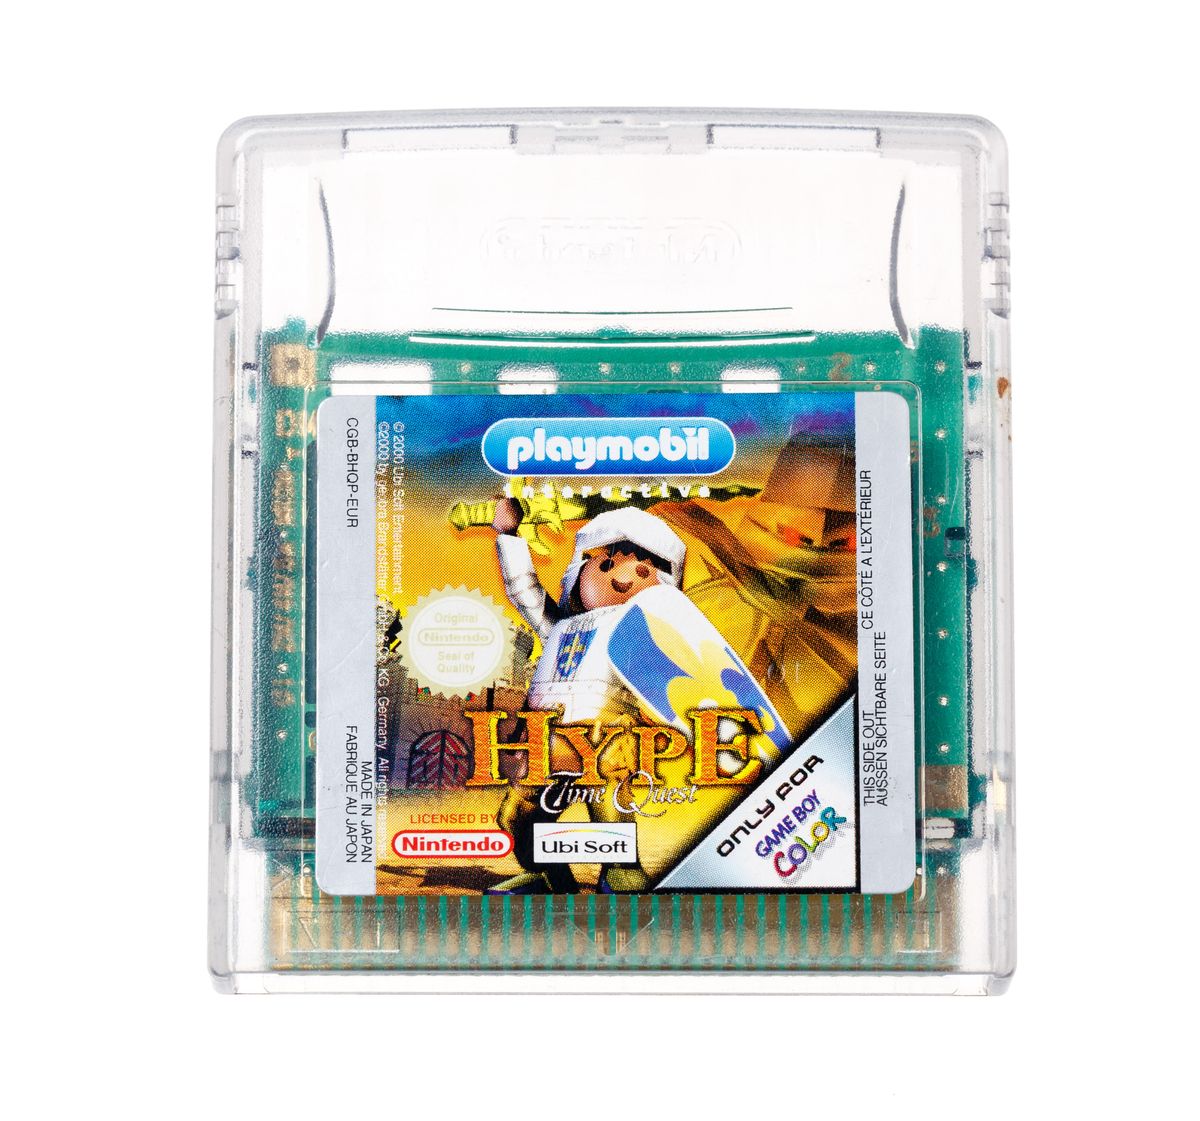 Playmobil Hype Time Quest - Gameboy Color Games